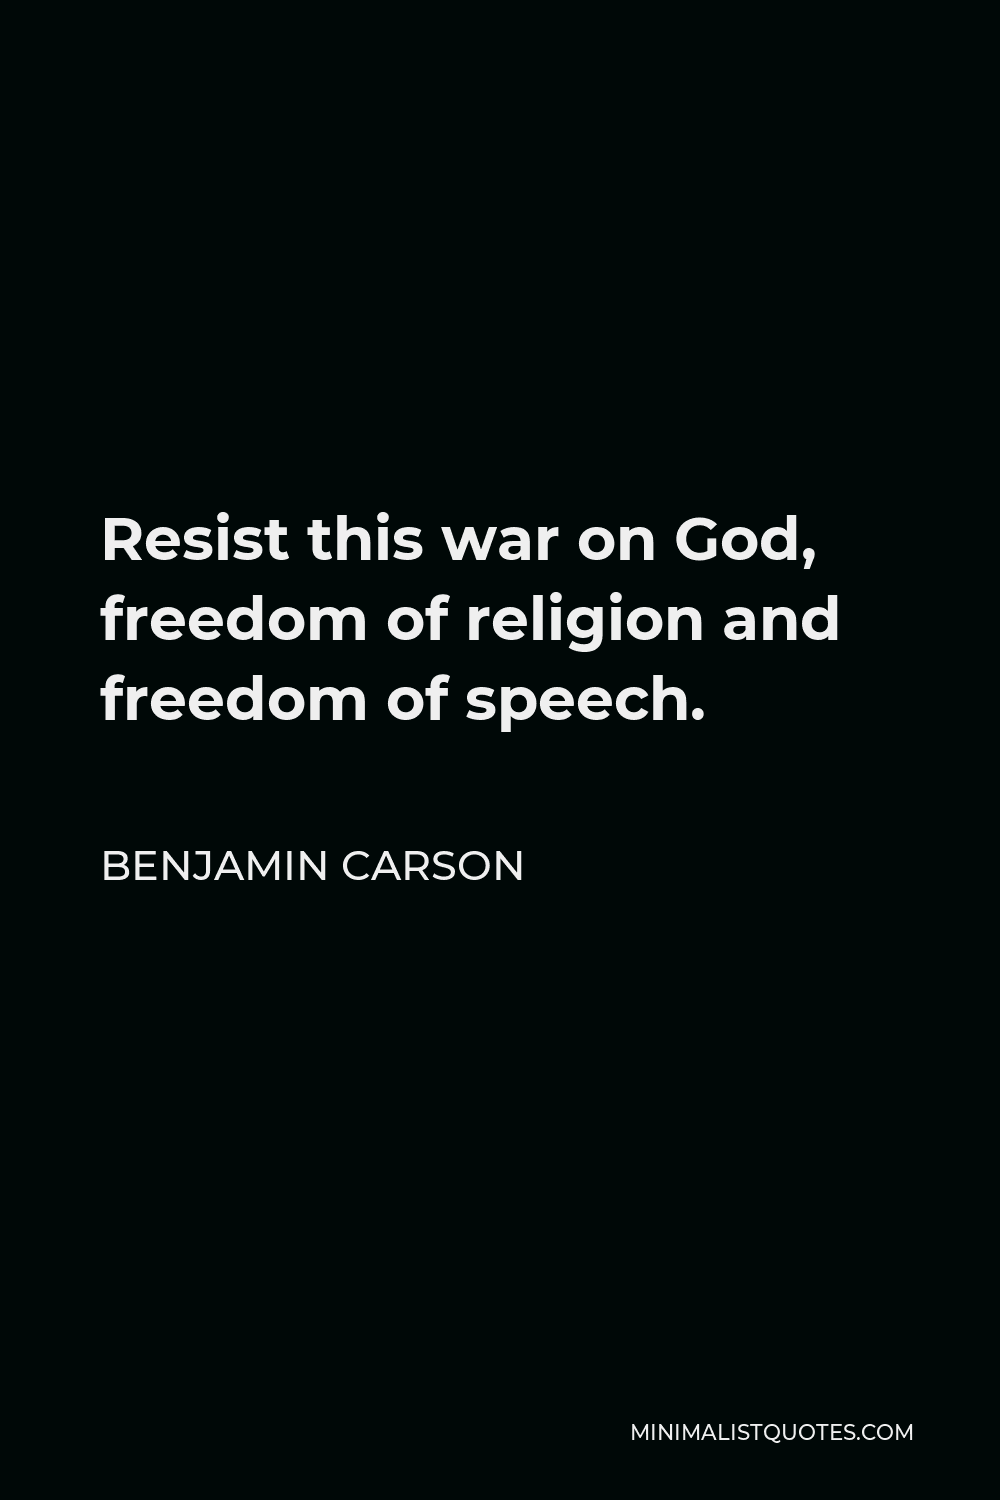 Benjamin Carson Quote - Resist this war on God, freedom of religion and freedom of speech.